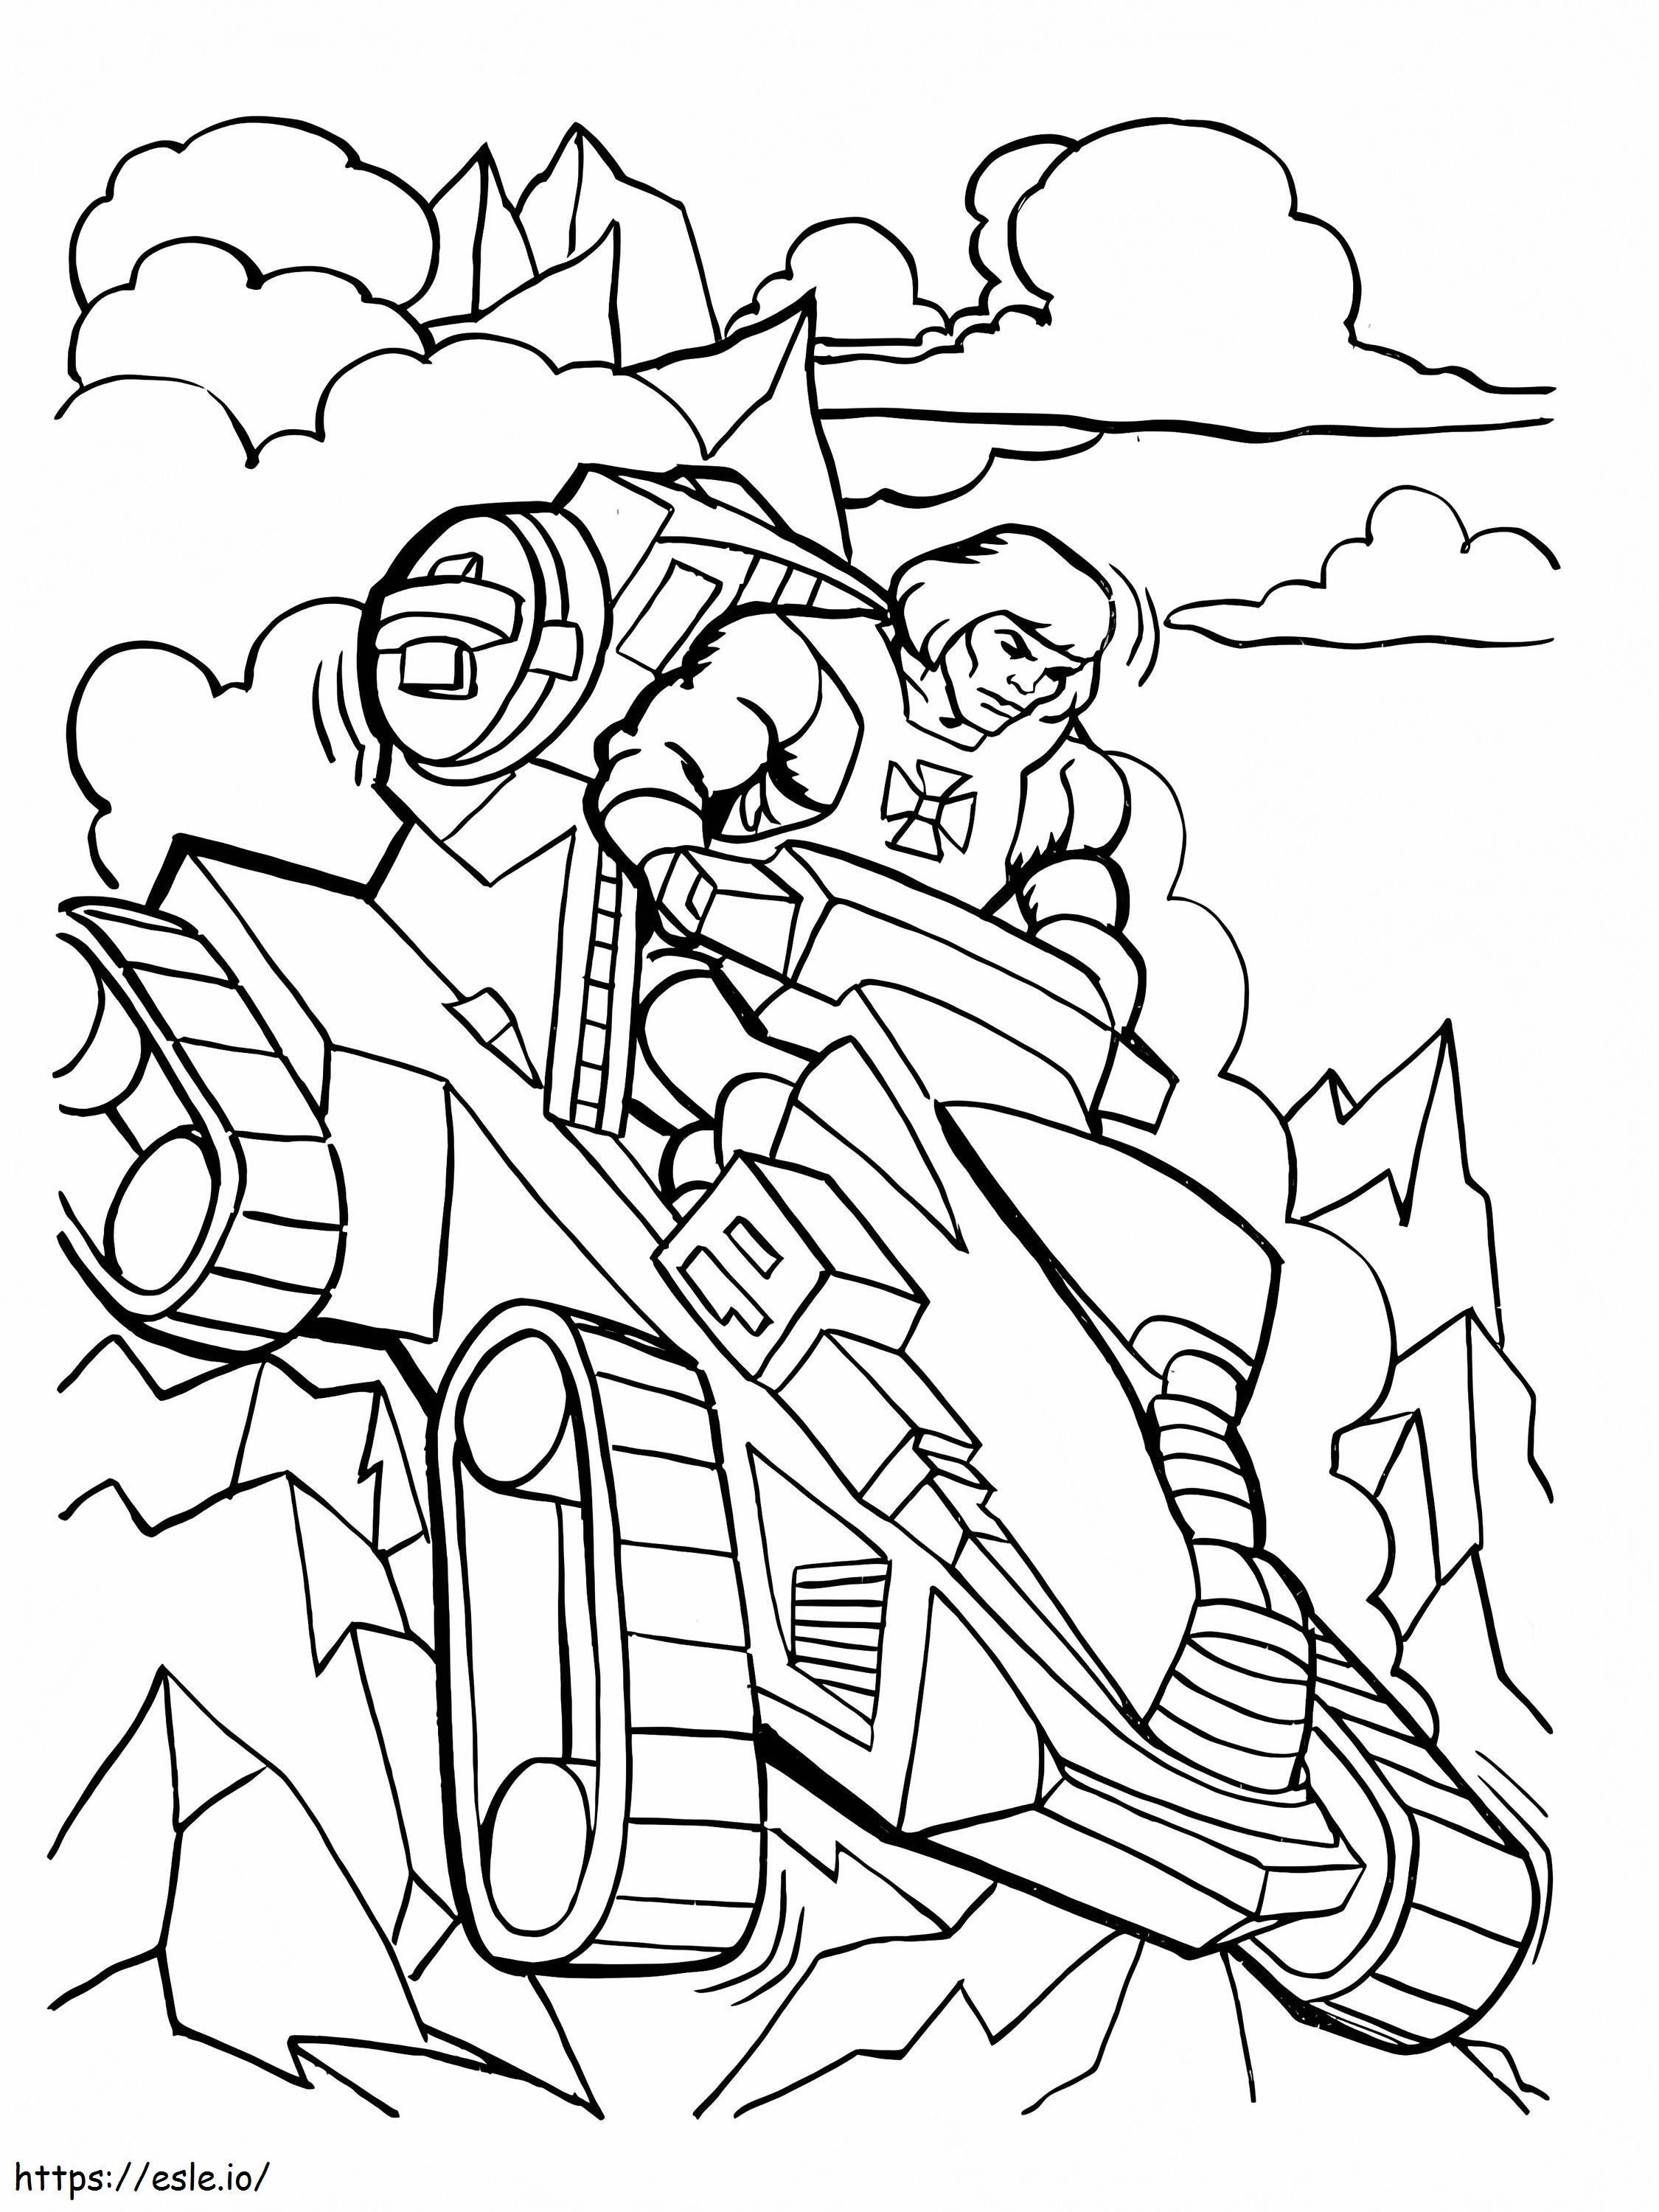 He Man Riding Attack Trak coloring page